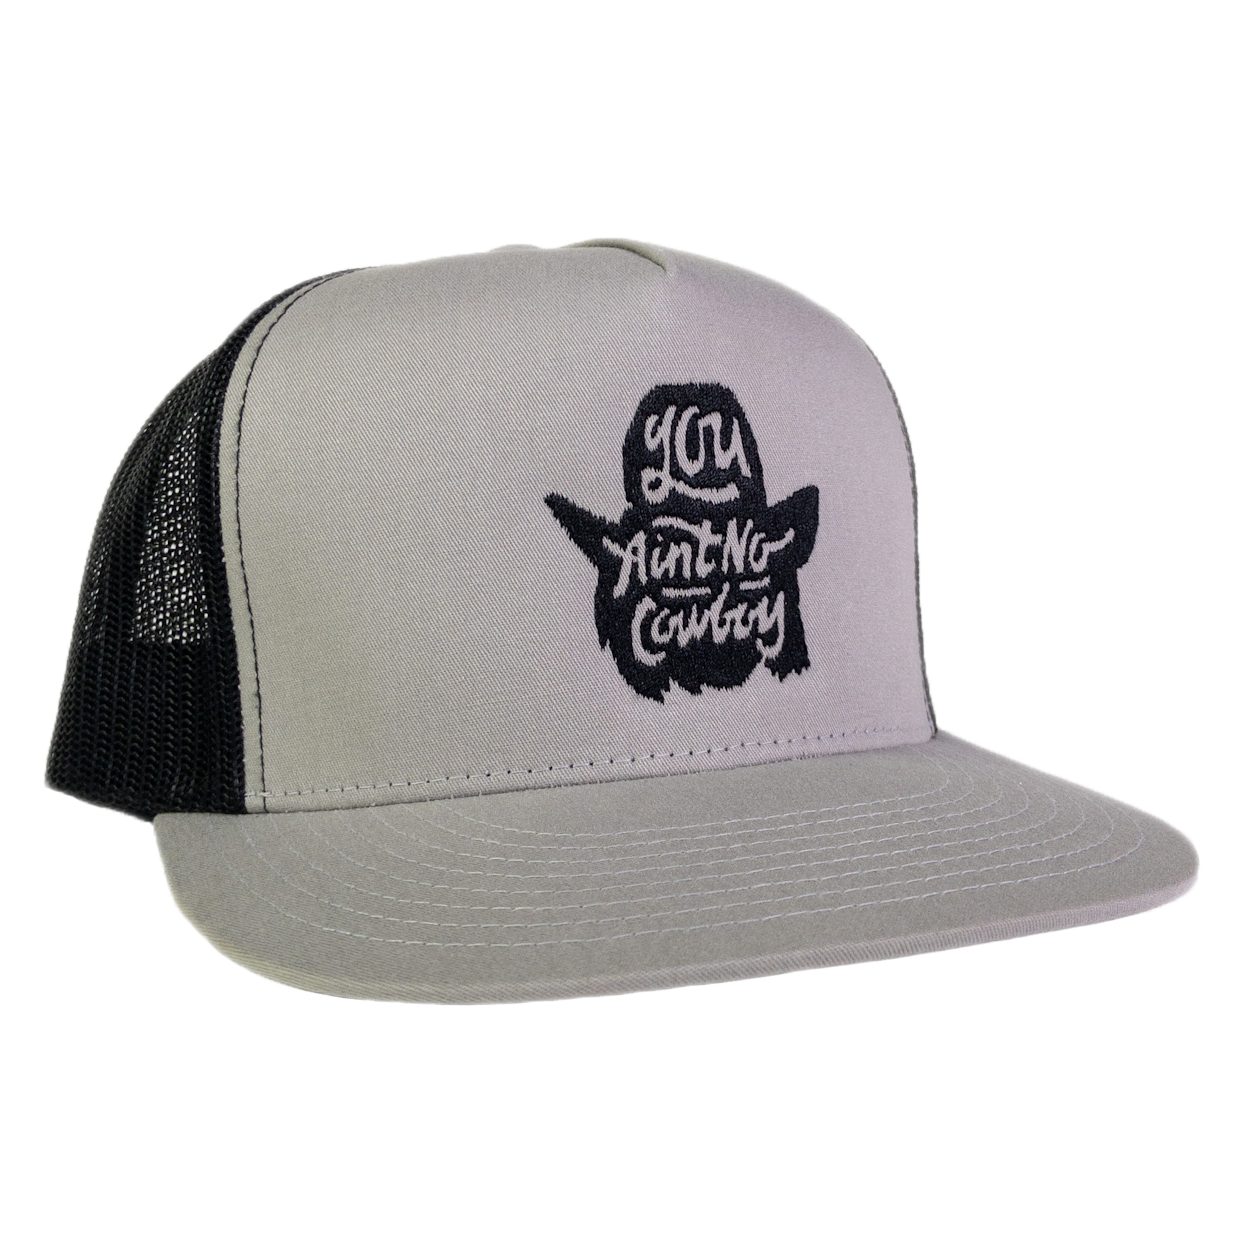 You Ain't No Cowboy Silhouette Silver and Black Mesh Flatbill